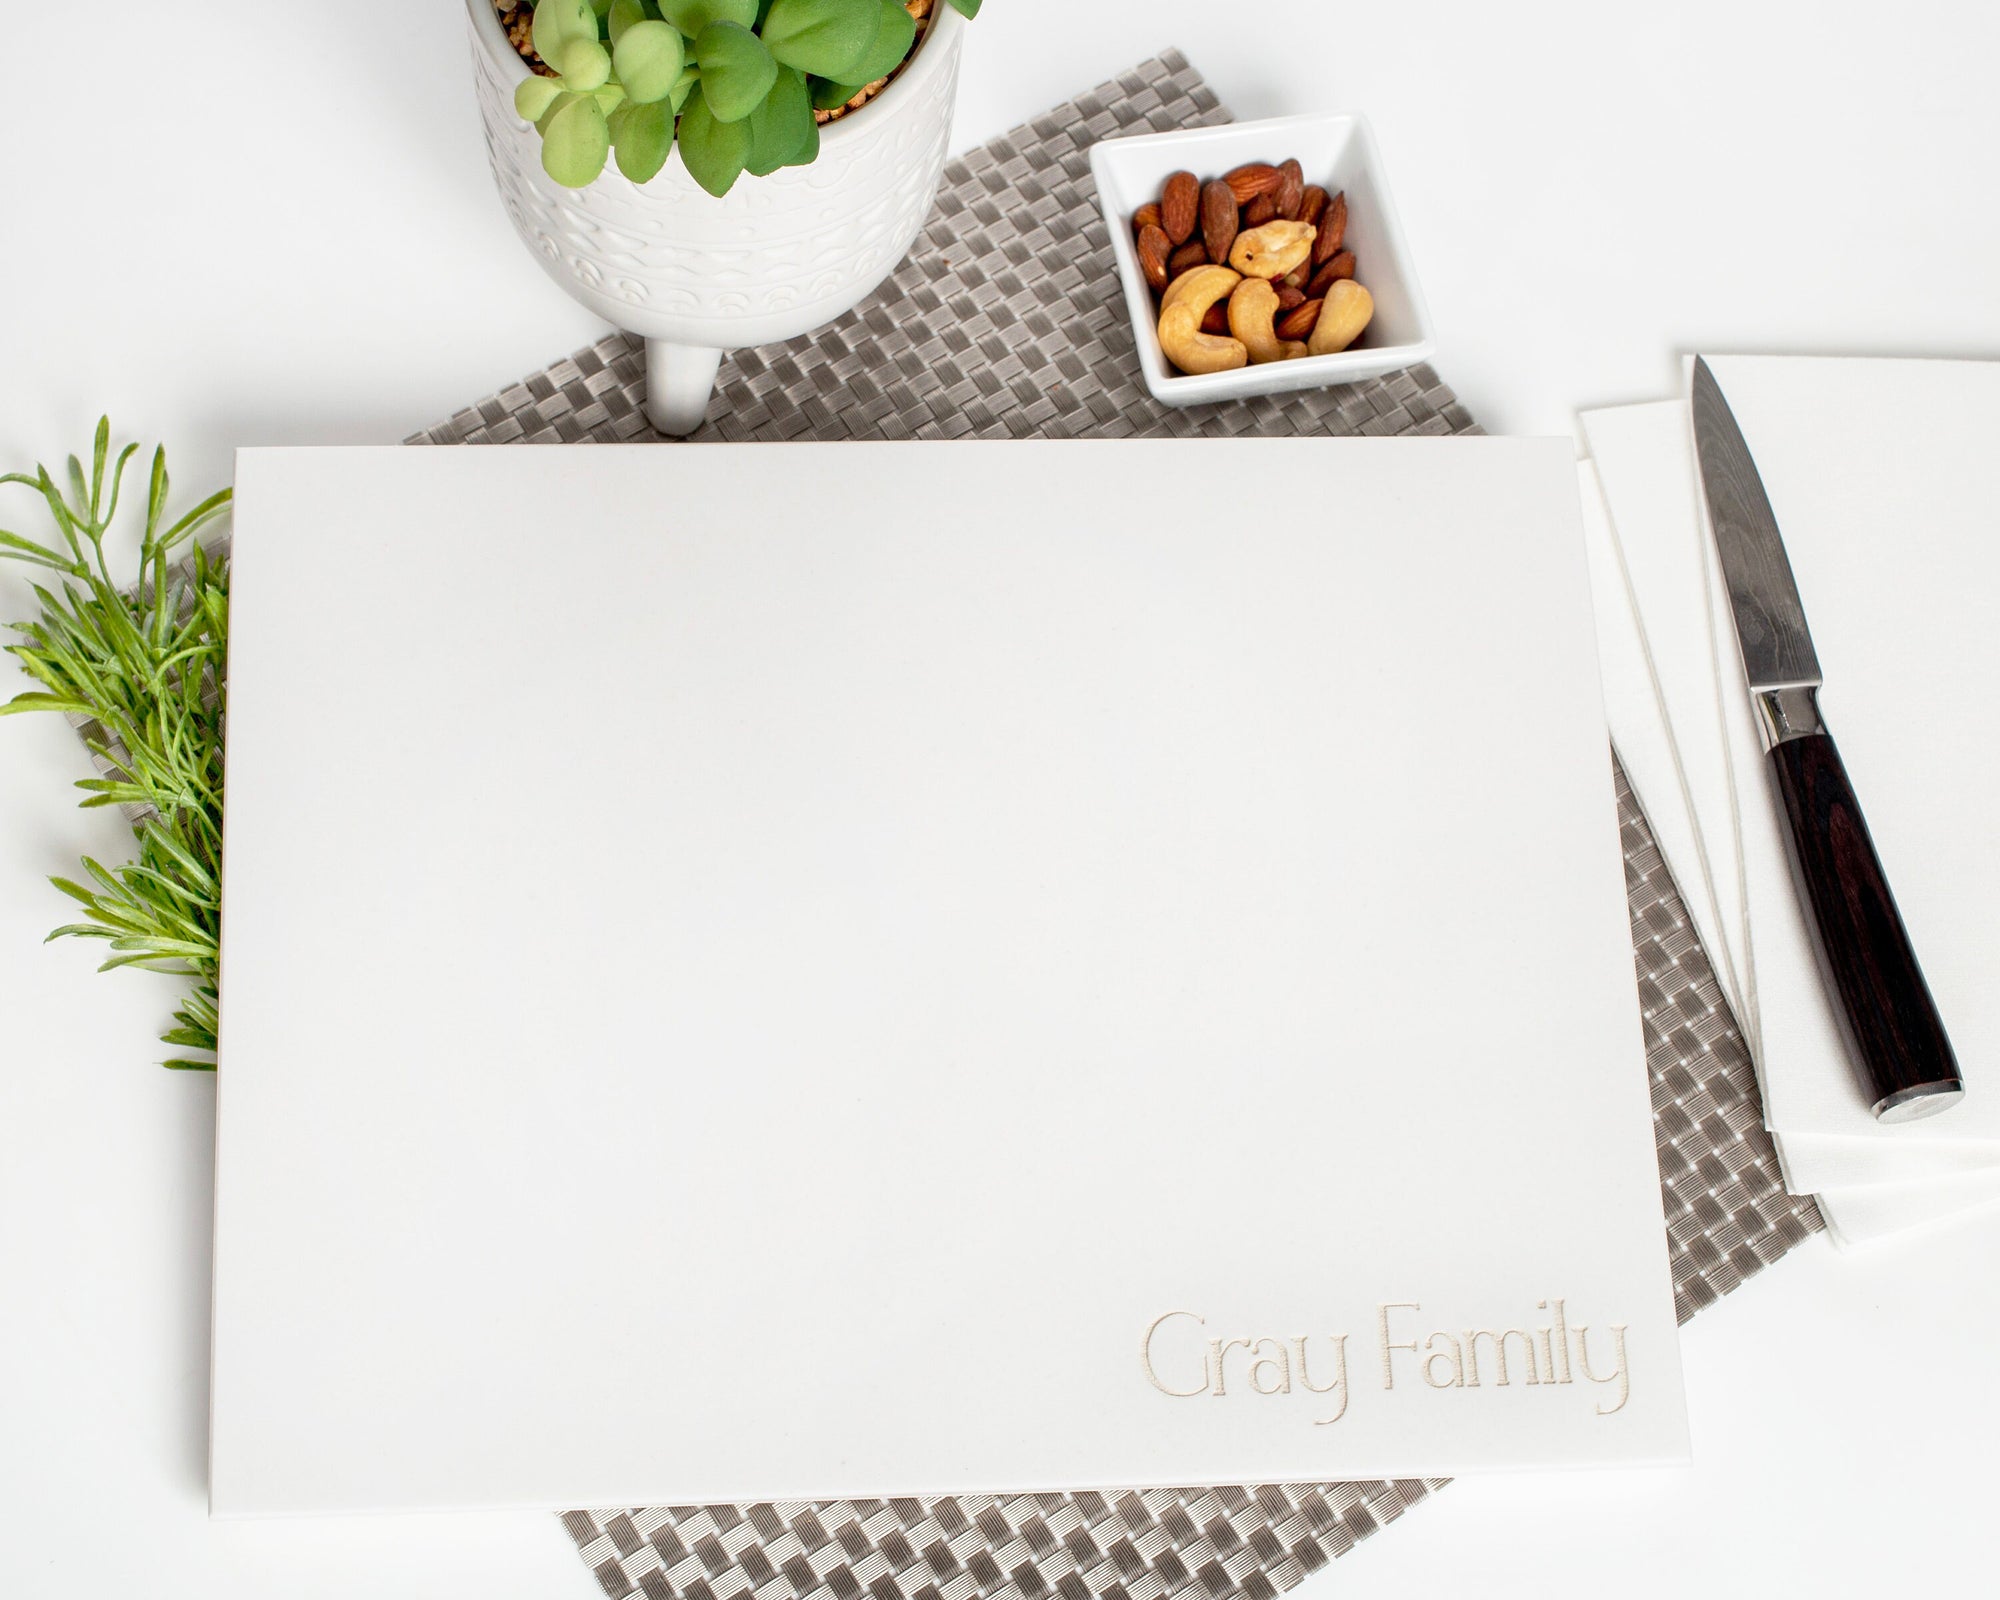 Create an elegant center piece for your kitchen with this White Corian Personalized Cutting Board. It is crafted from high-quality materials for maximum durability and features a unique and stylish design for a distinctive look. Perfect for both daily use and special occasions.